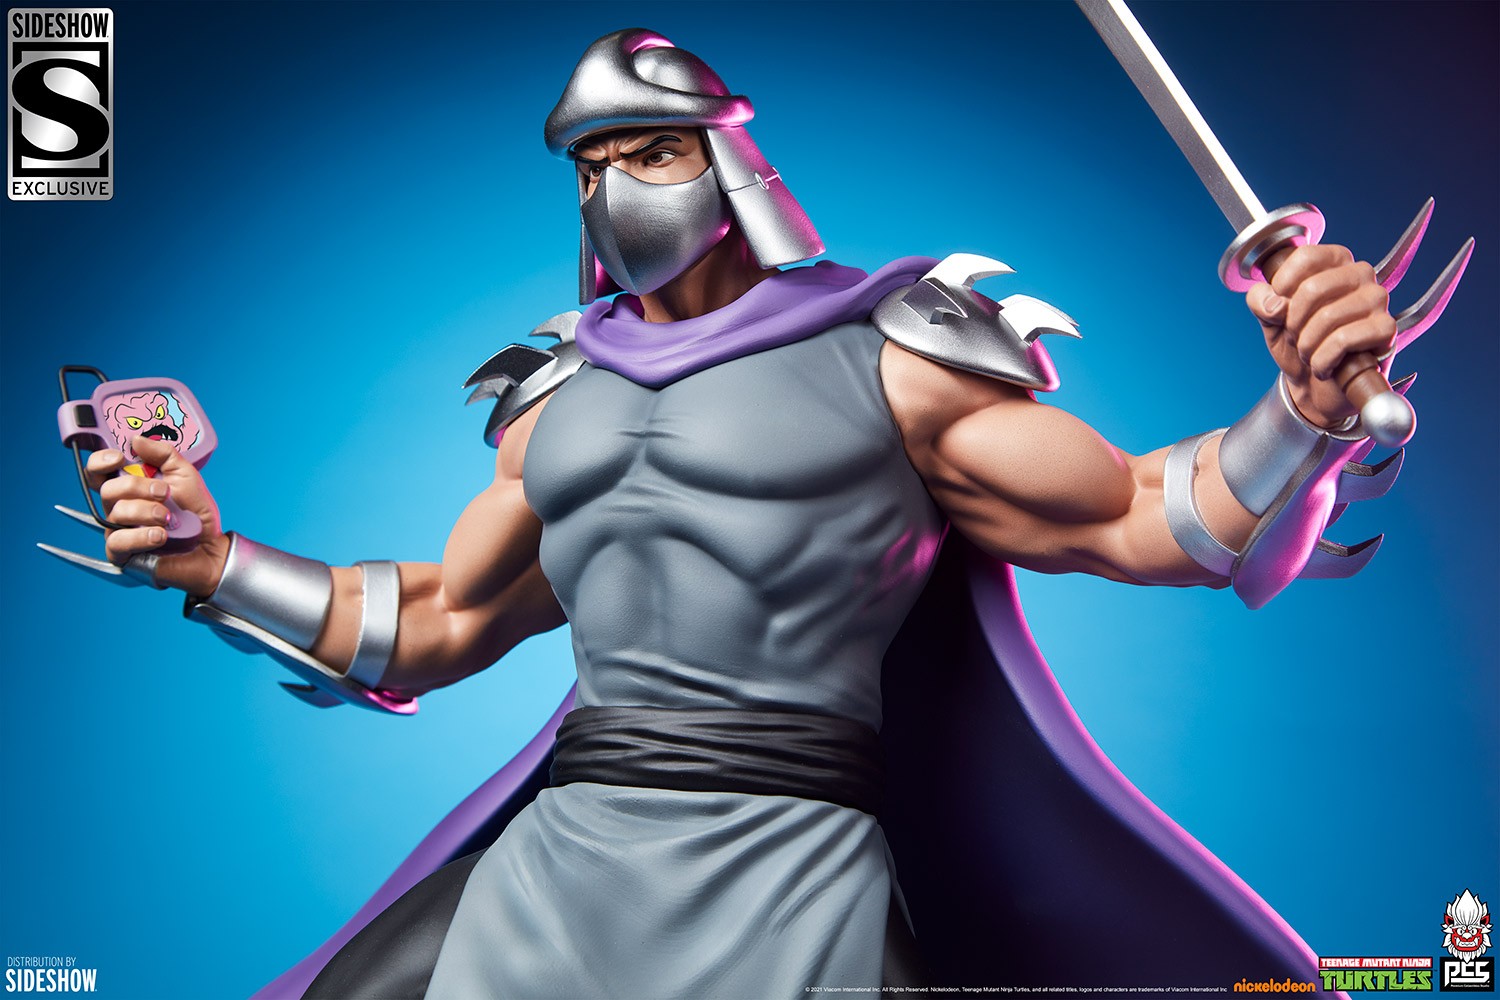 Shredder Exclusive Edition (Prototype Shown) View 6